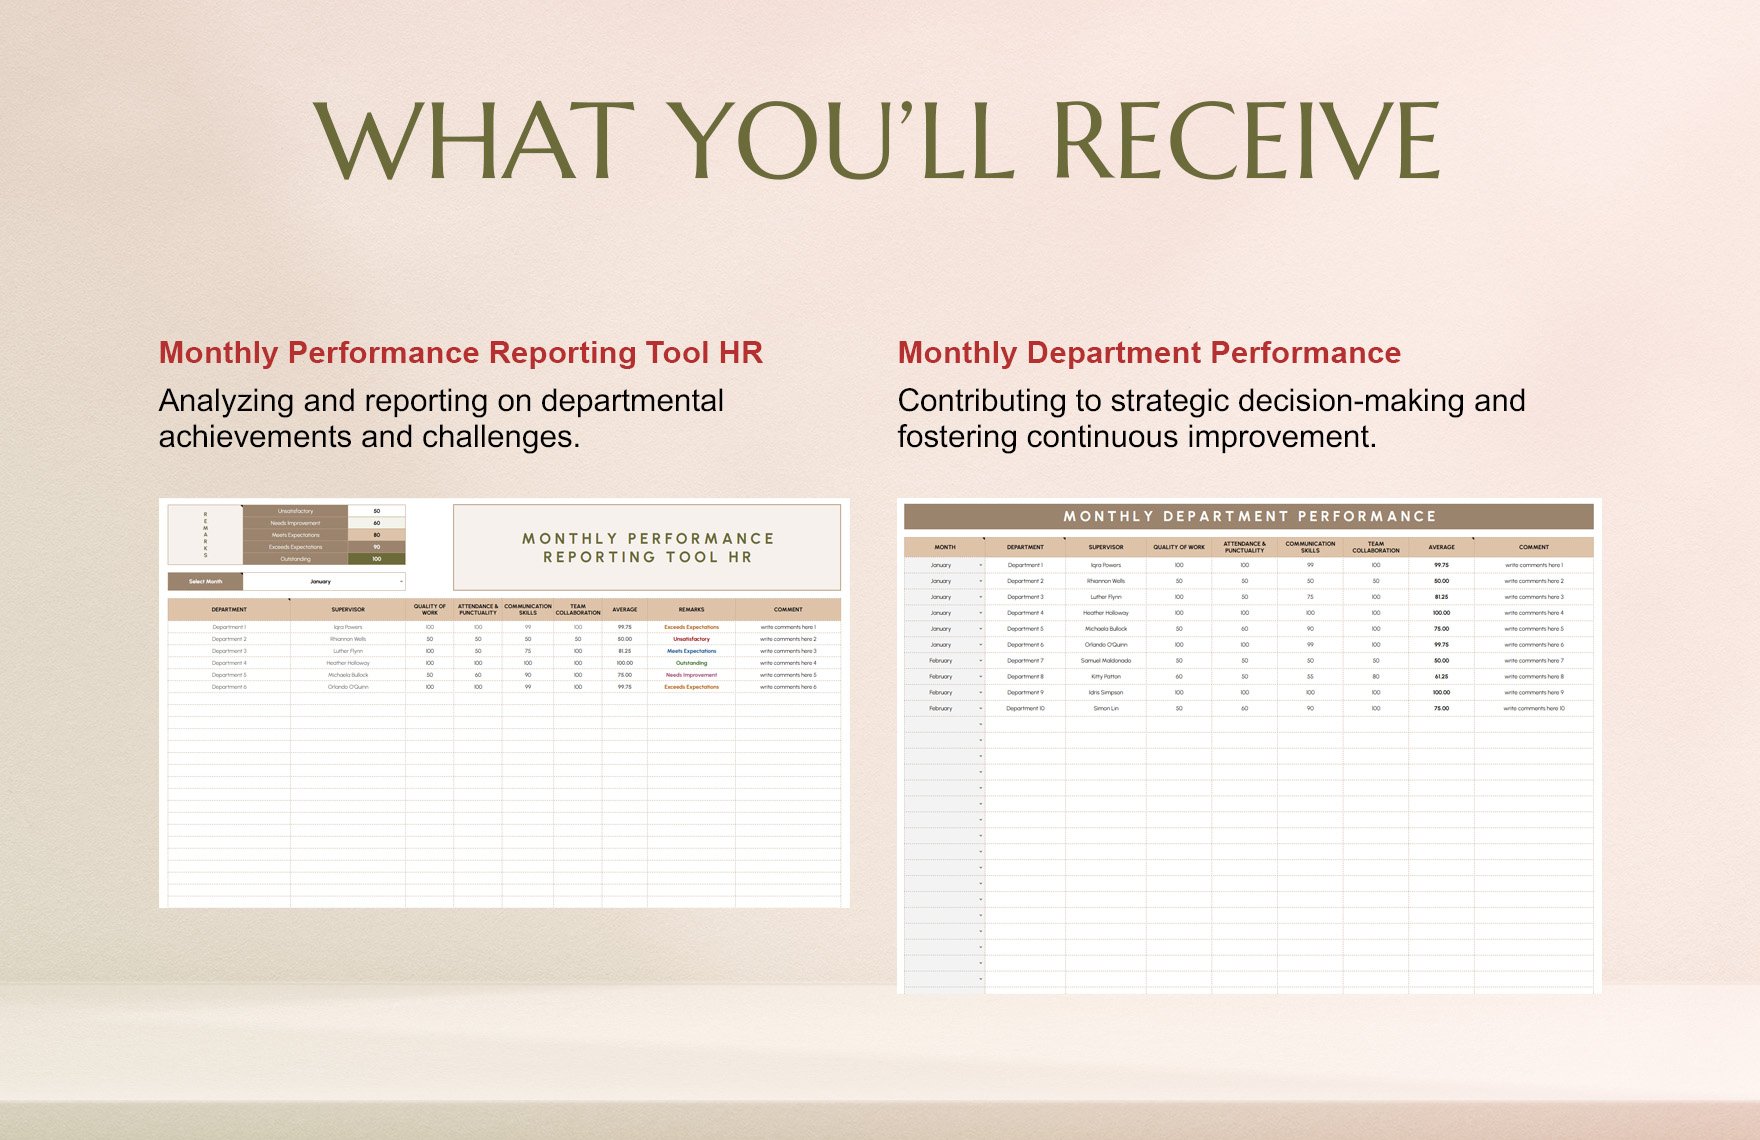 Monthly Performance Reporting Tool HR Template